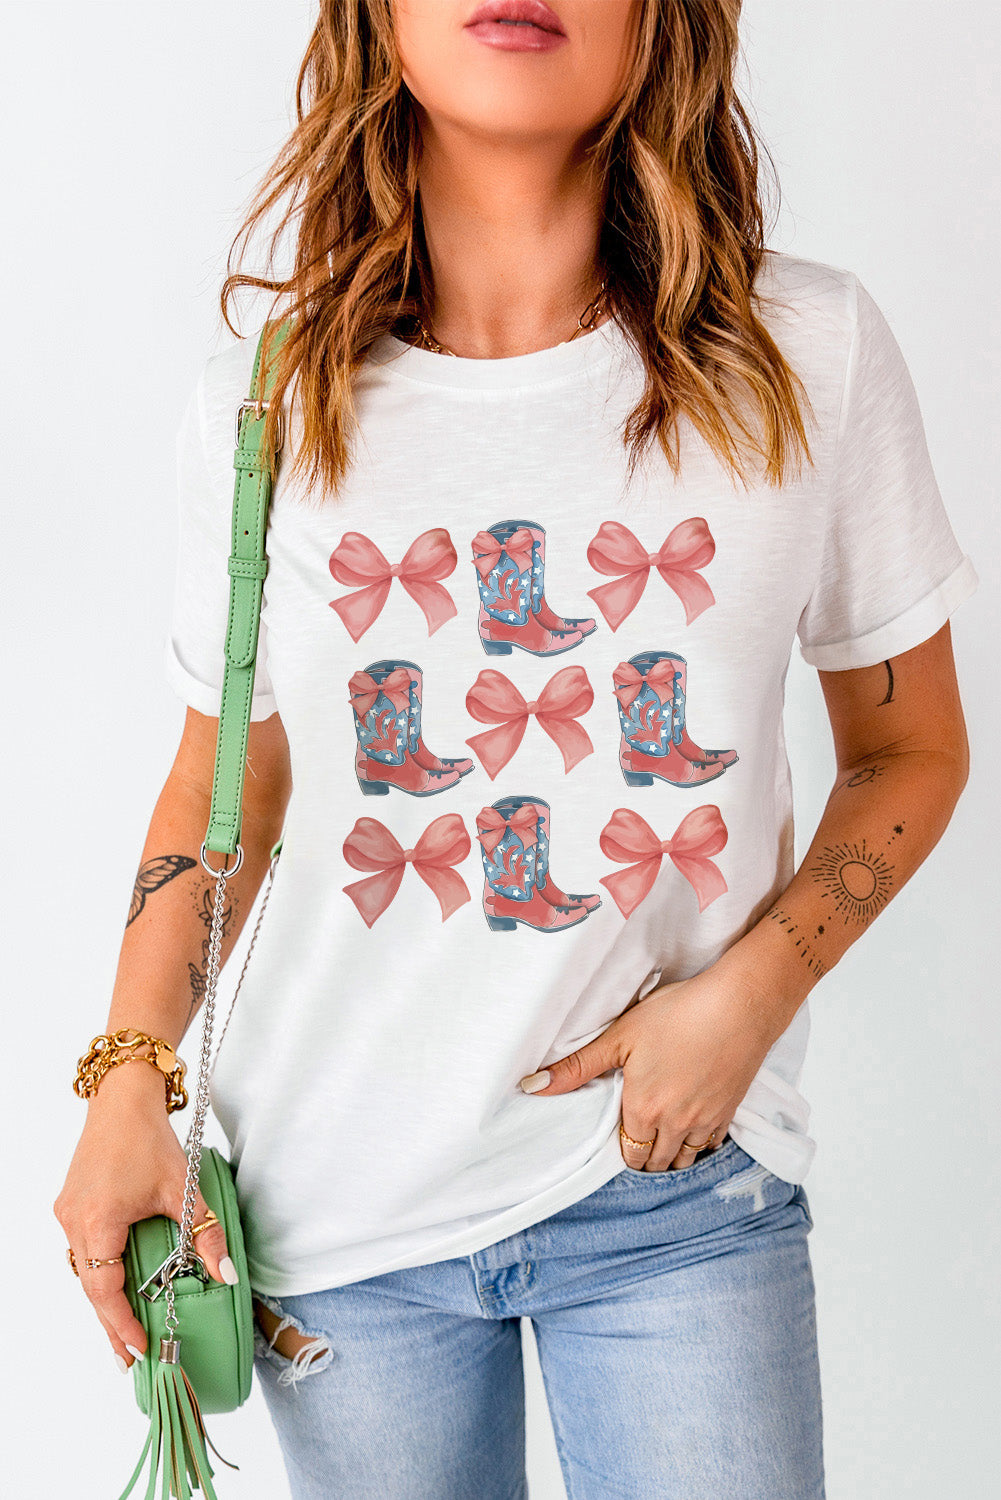 White Bowknot & Cowgirl Boots Graphic Tee Graphic Tees JT's Designer Fashion